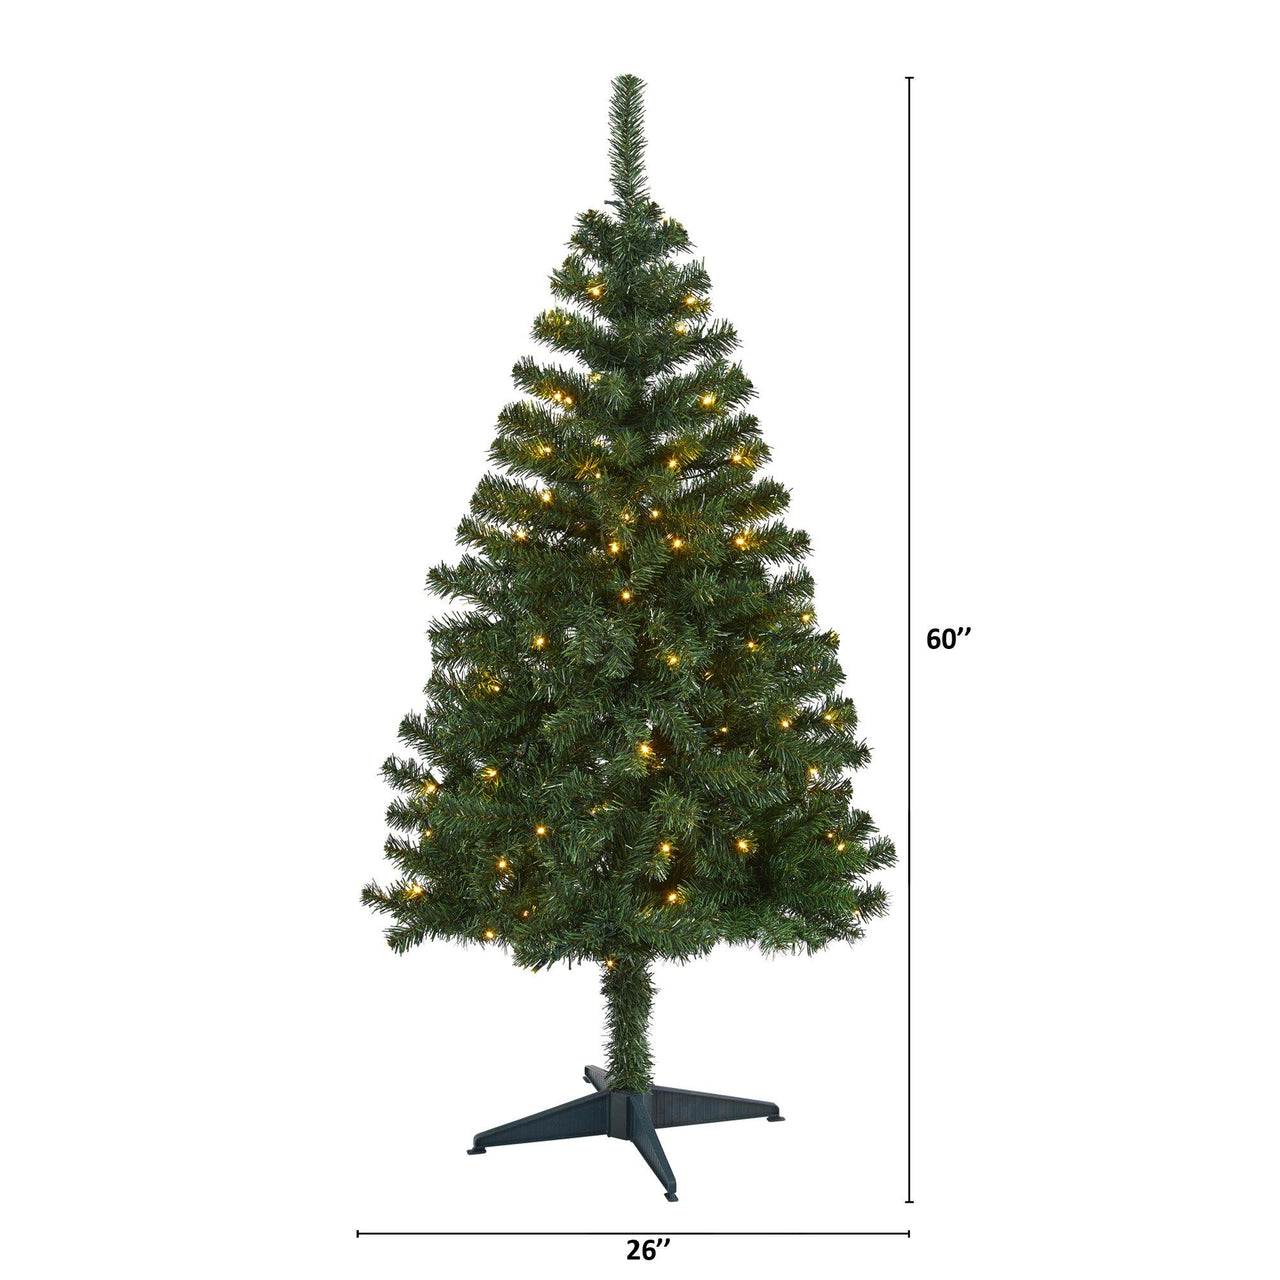 5' Northern Tip Pine Artificial Christmas Tree with 150 Clear LED Lights - The Fox Decor